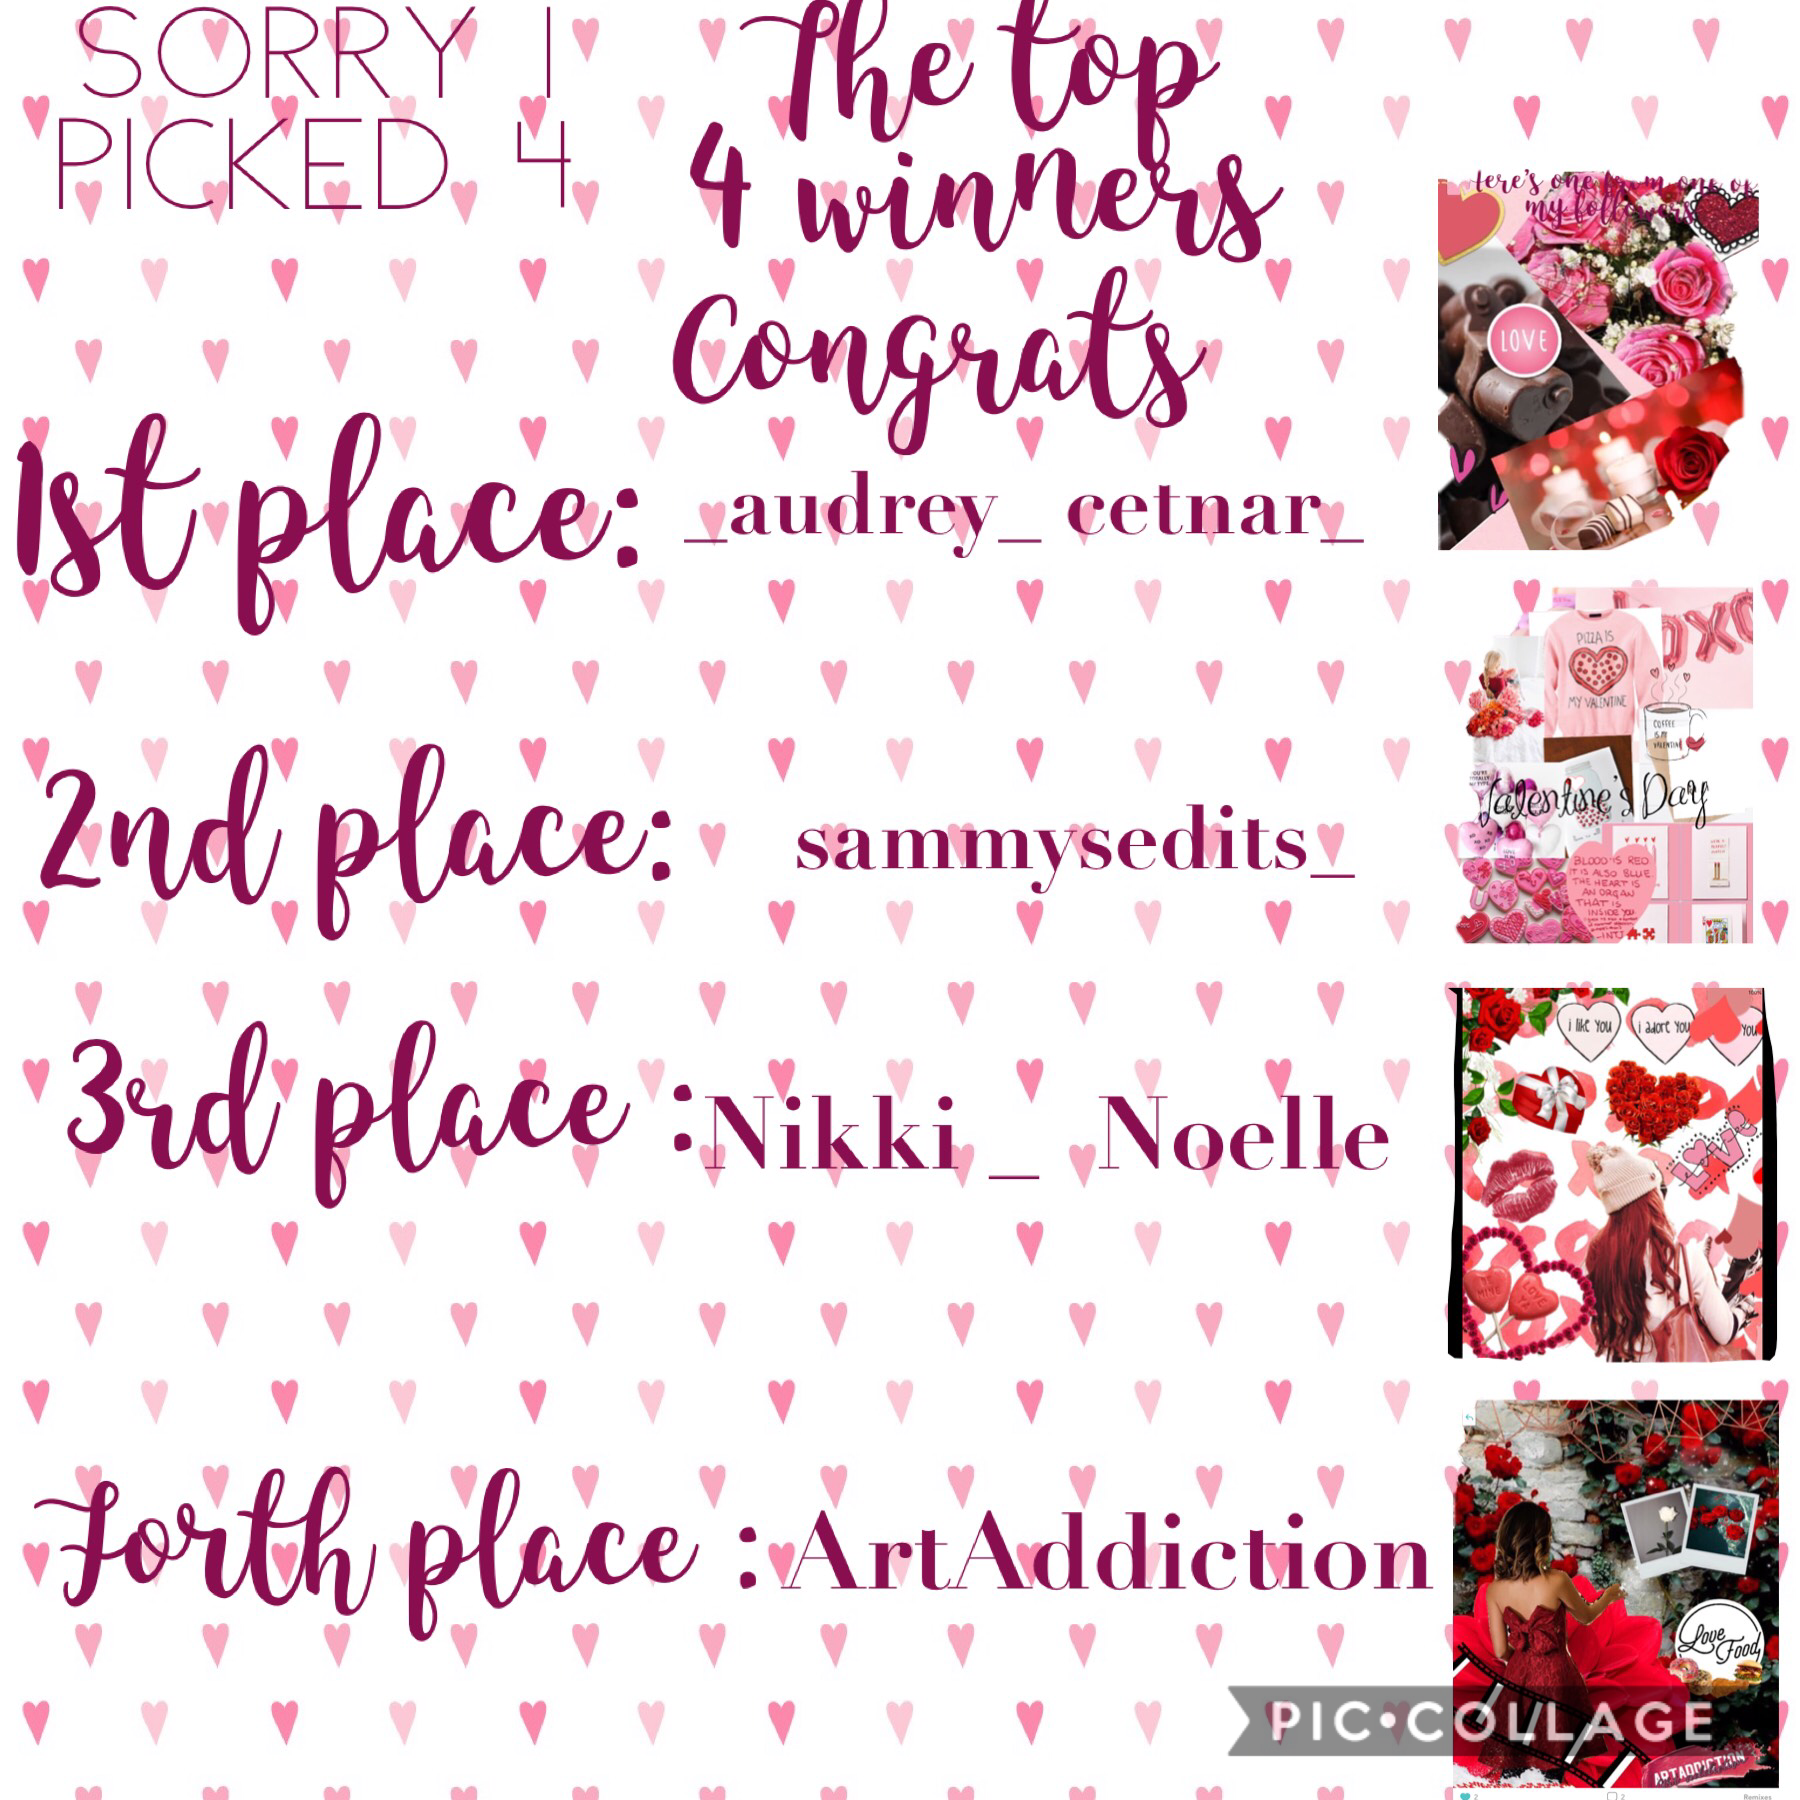 Congrats to everyone who participated. You all did awesome job. If you didn’t win, don’t worry because a have a future contest coming up. Thank you all for your hard work. I pick 4 because it was hard to chose. Congrats!